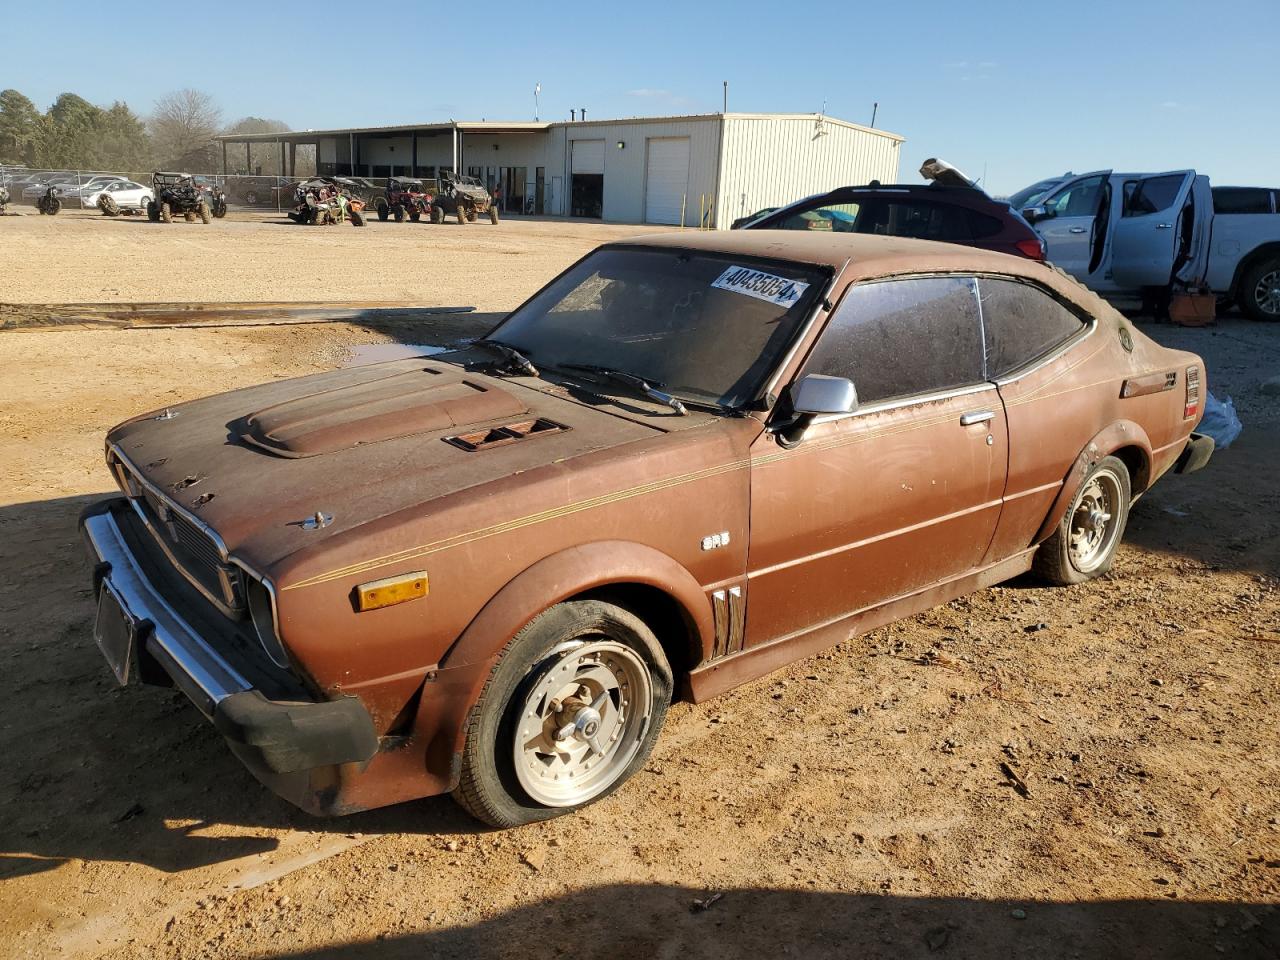 TE3751**** Salvage and Wrecked 1975 Toyota Corolla in AL - Tanner